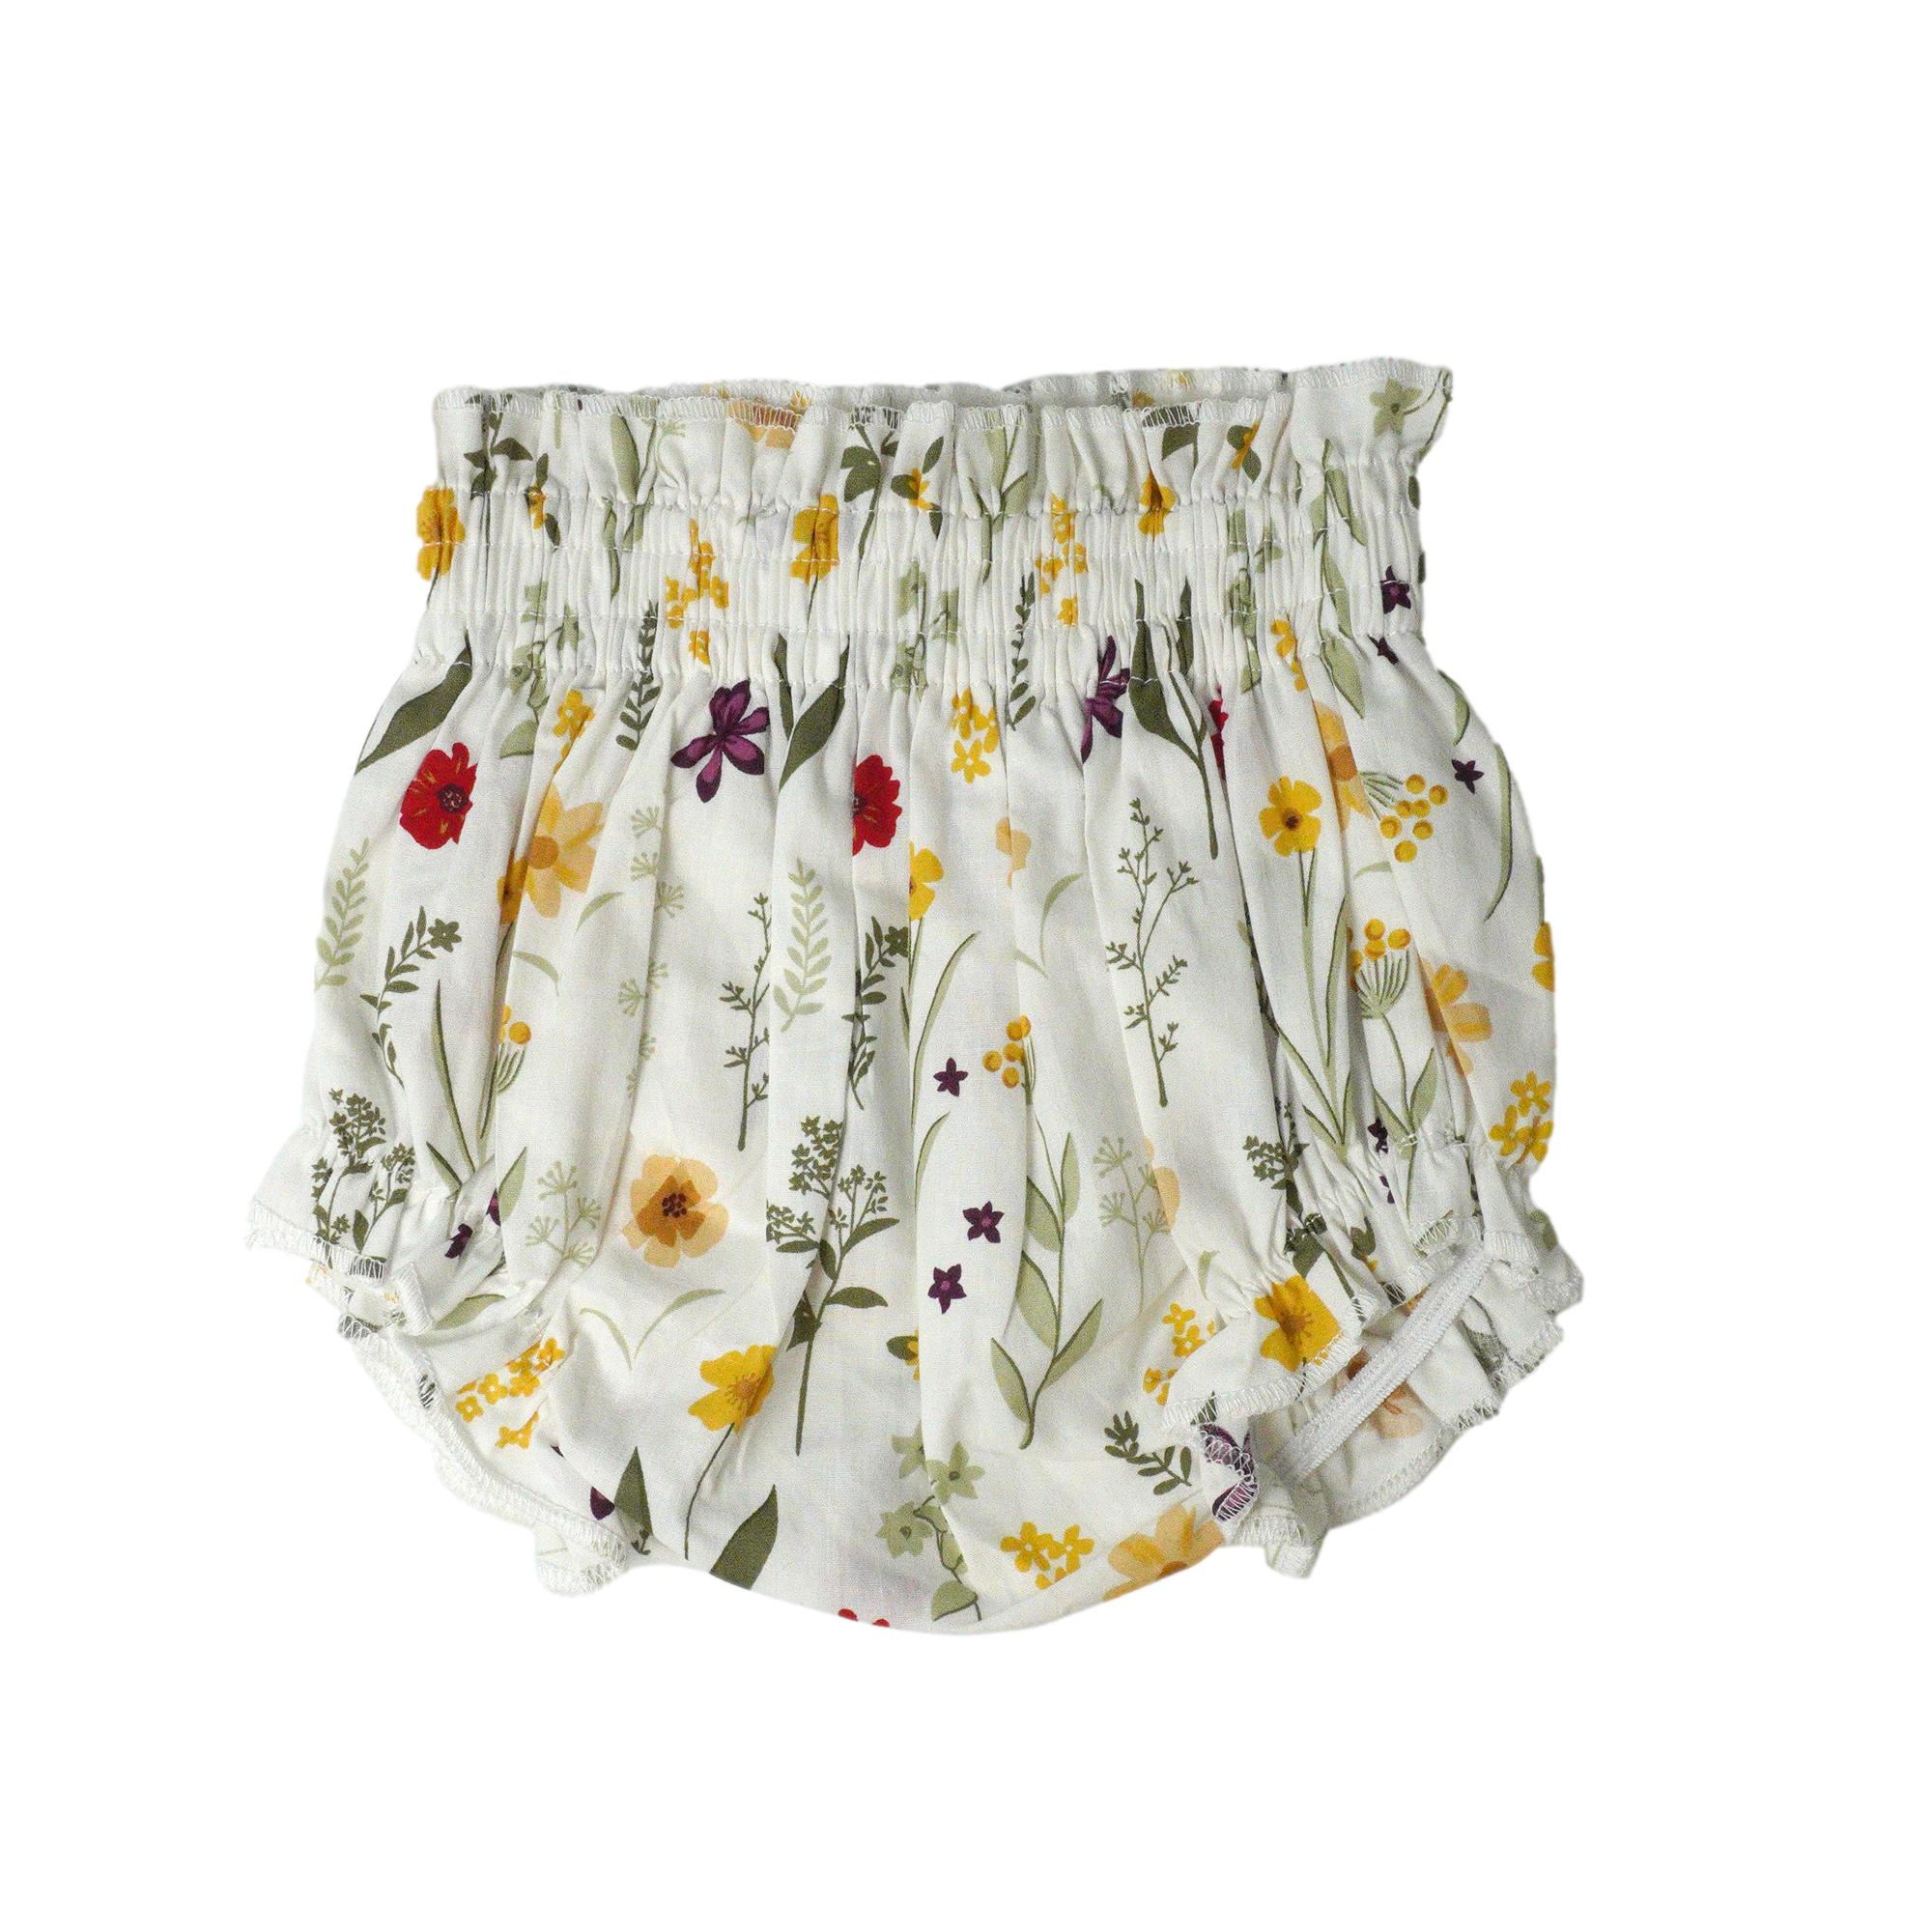 Floral Vines Baby Cotton Bloomer Shorts